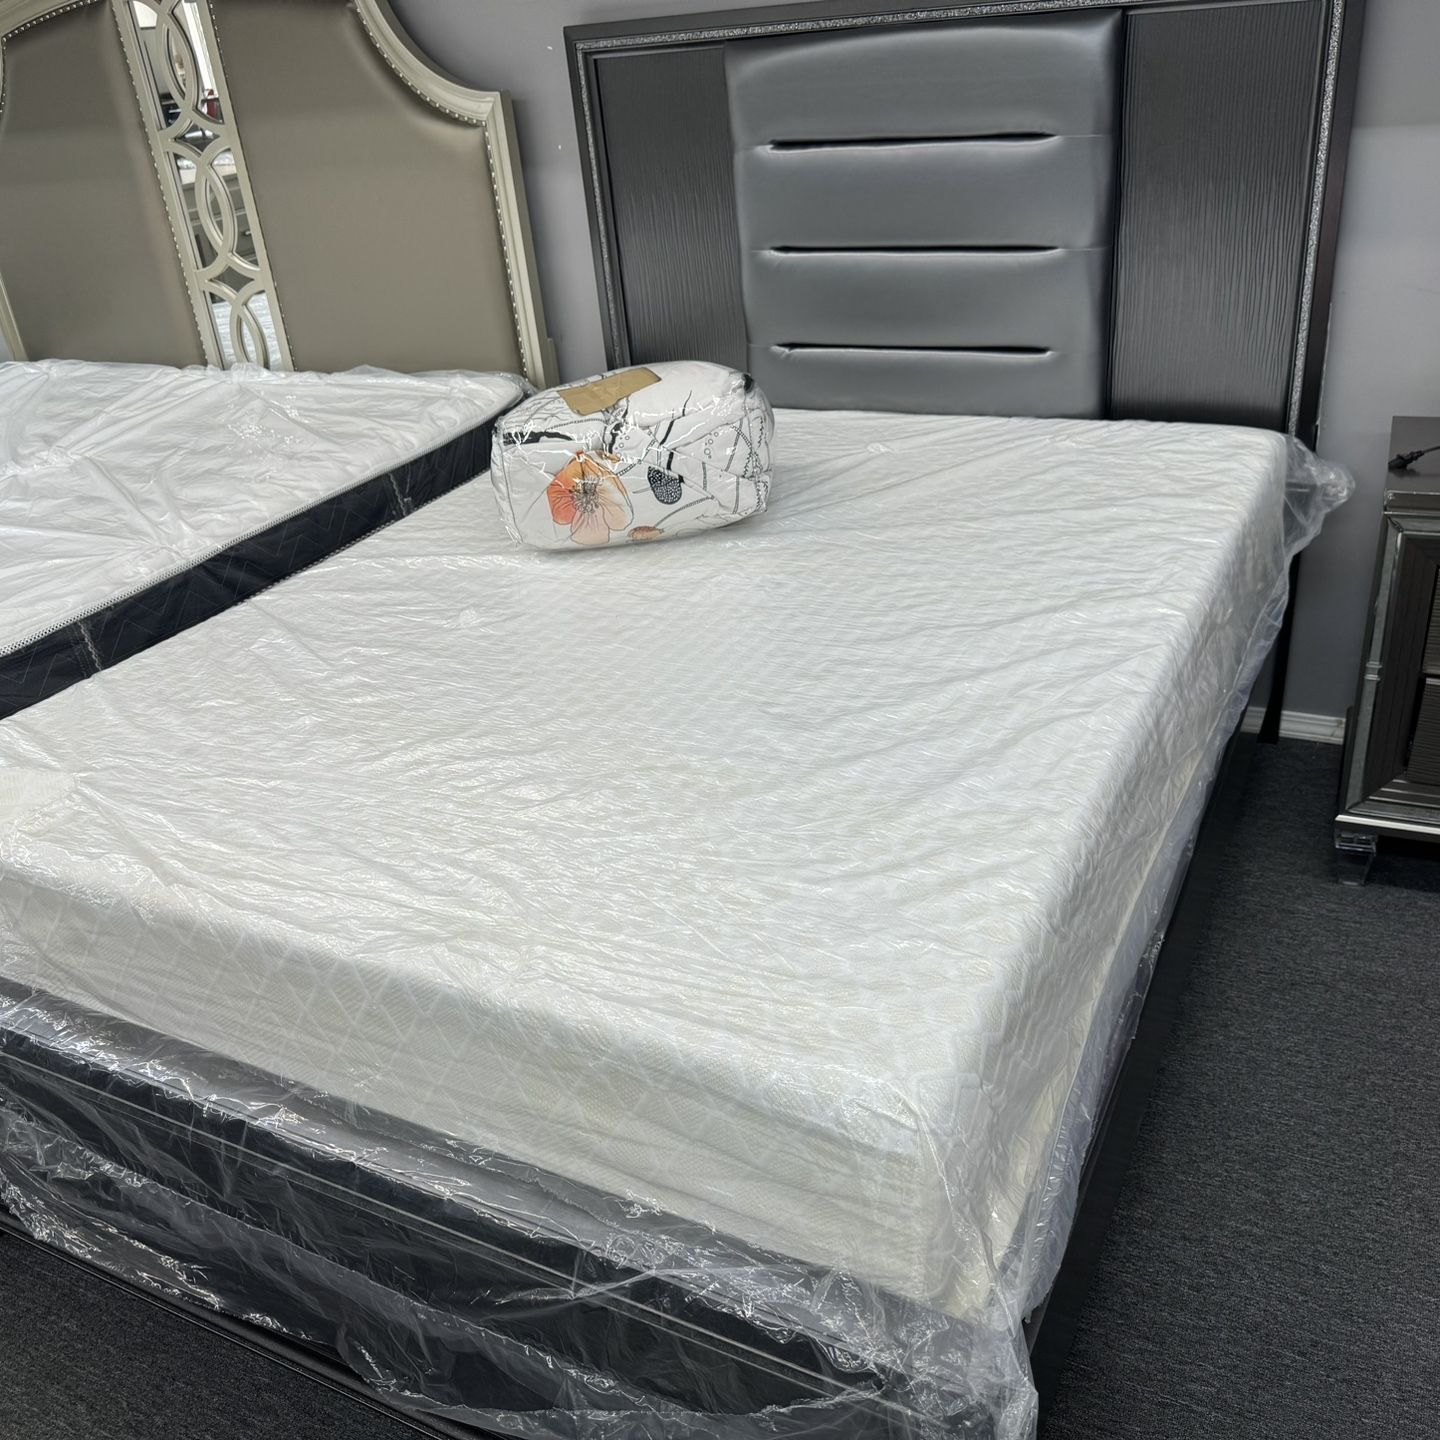 King Memory Foam Mattress Only 250 furniture mattress appliance 0-99 down no credit needed no intrest financing available deals 